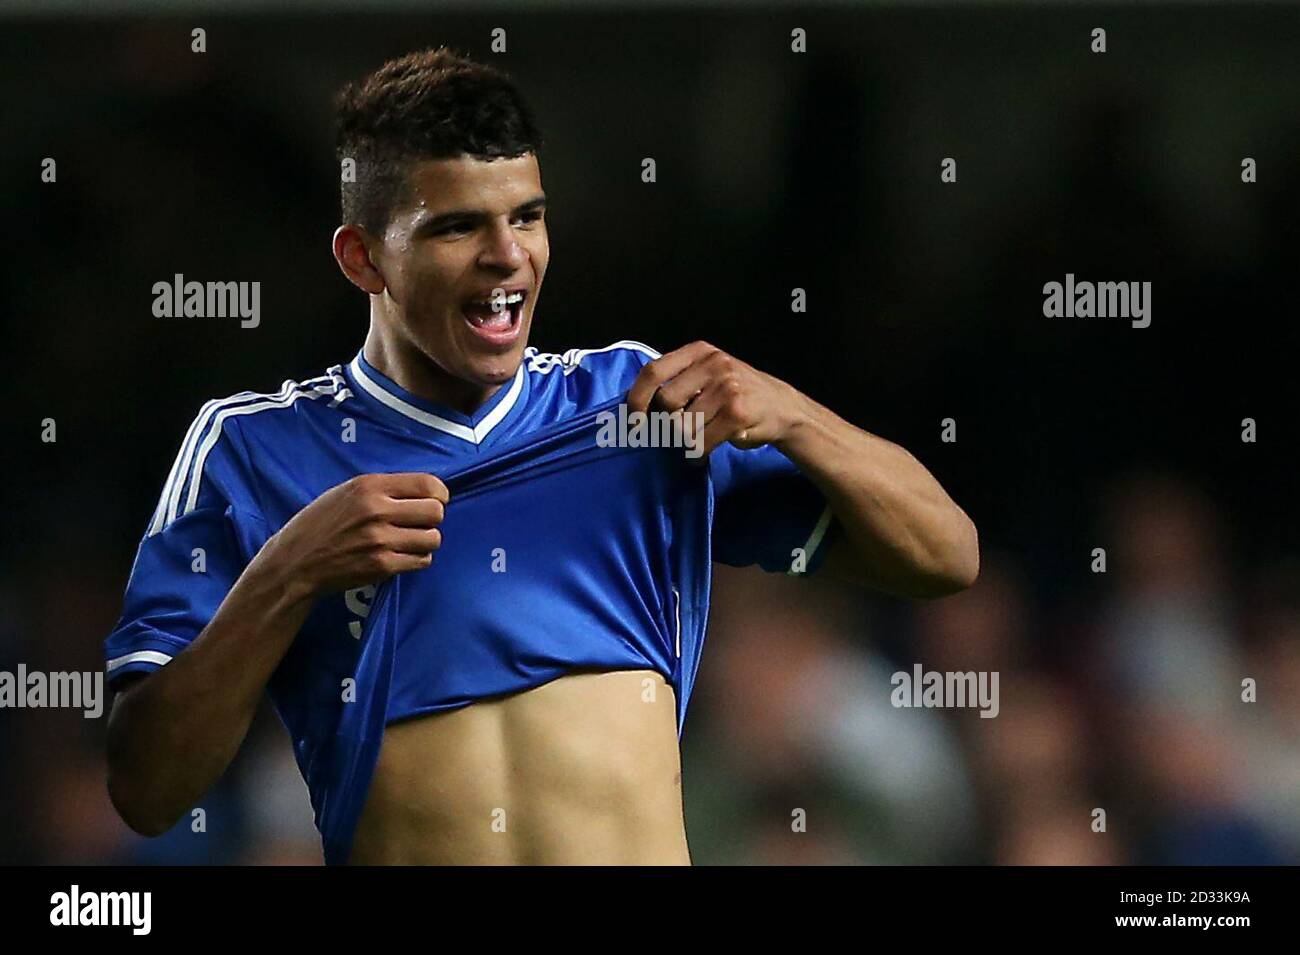 Dominic Solanke celebrates victory after the FA Youth Cup Final, Second Leg match at Stamford Bridge, London. Stock Photo